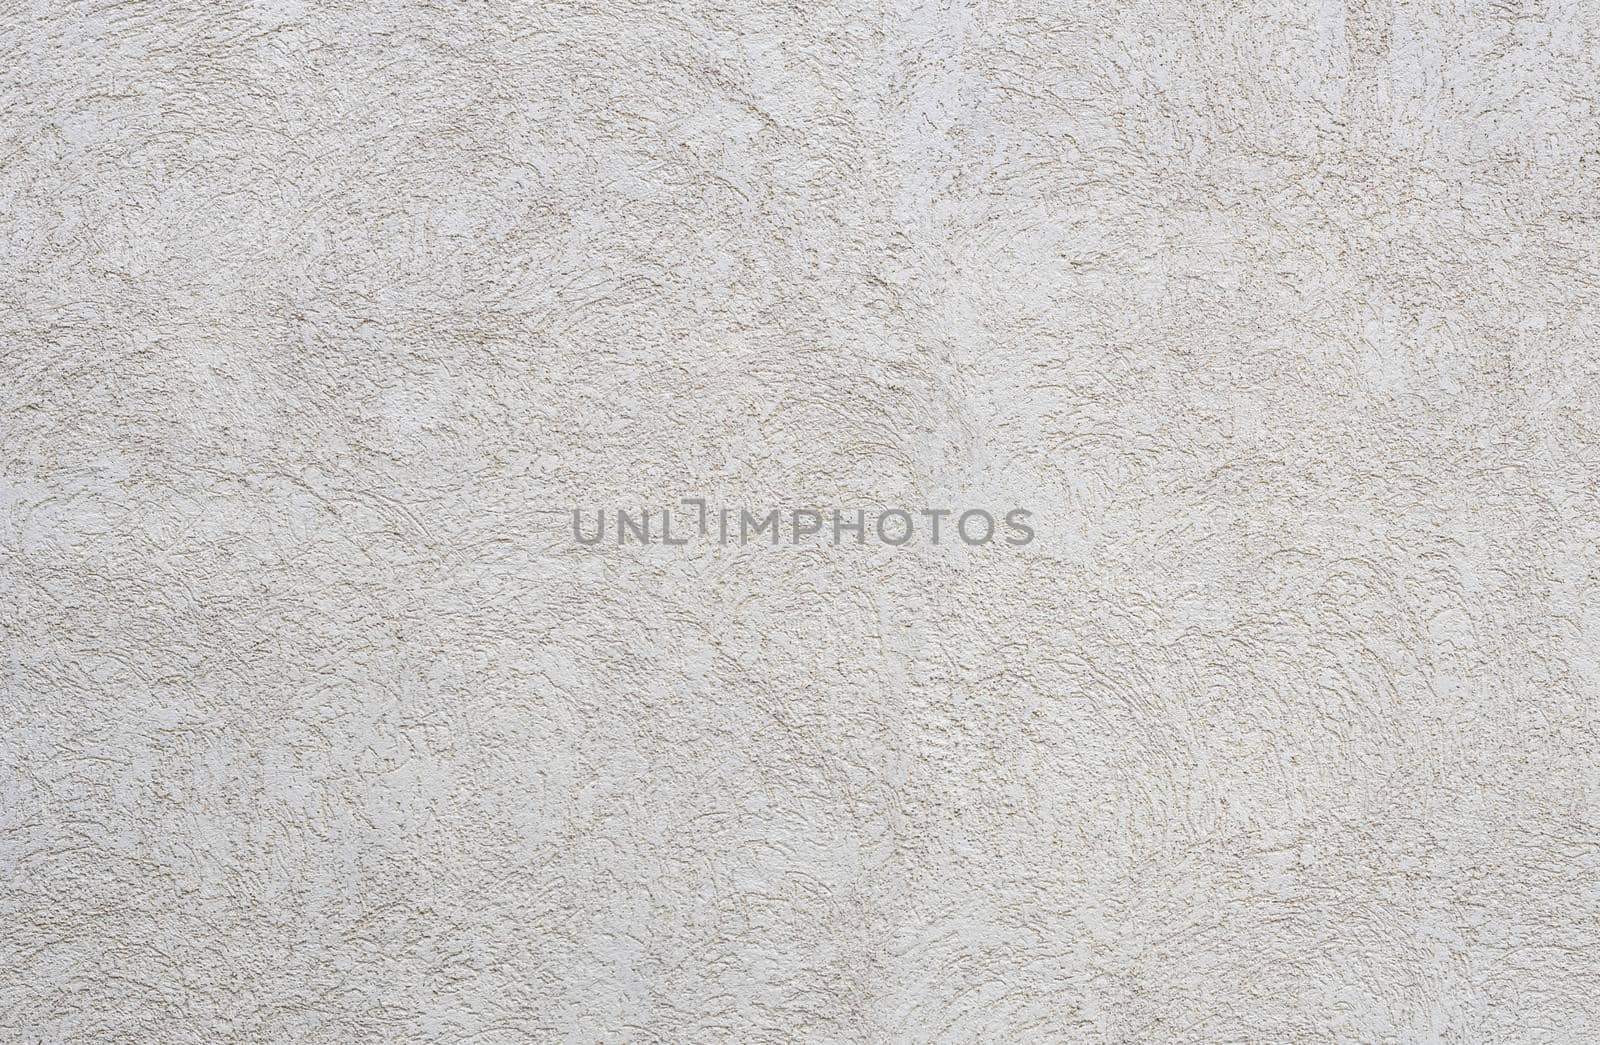 Vintage or grungy grey background of natural cement or stone old texture as a retro pattern wall. It is a concept, conceptual or metaphor wall banner, grunge, material, aged, rust or construction